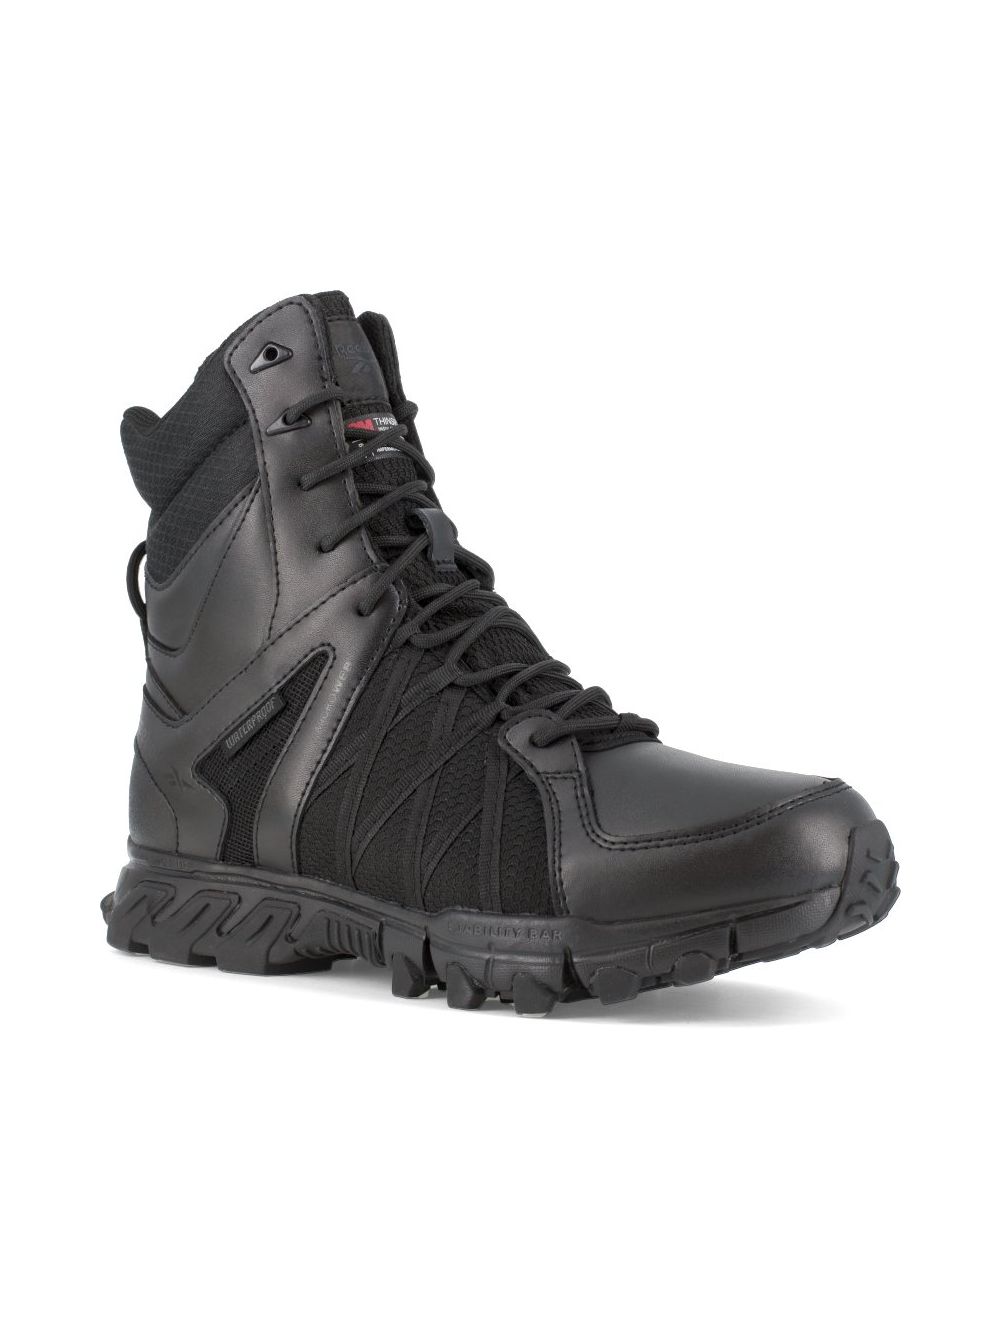 Trailgrip Tactical 8'' Waterproof Insulated Boot w/ Soft Toe - Black